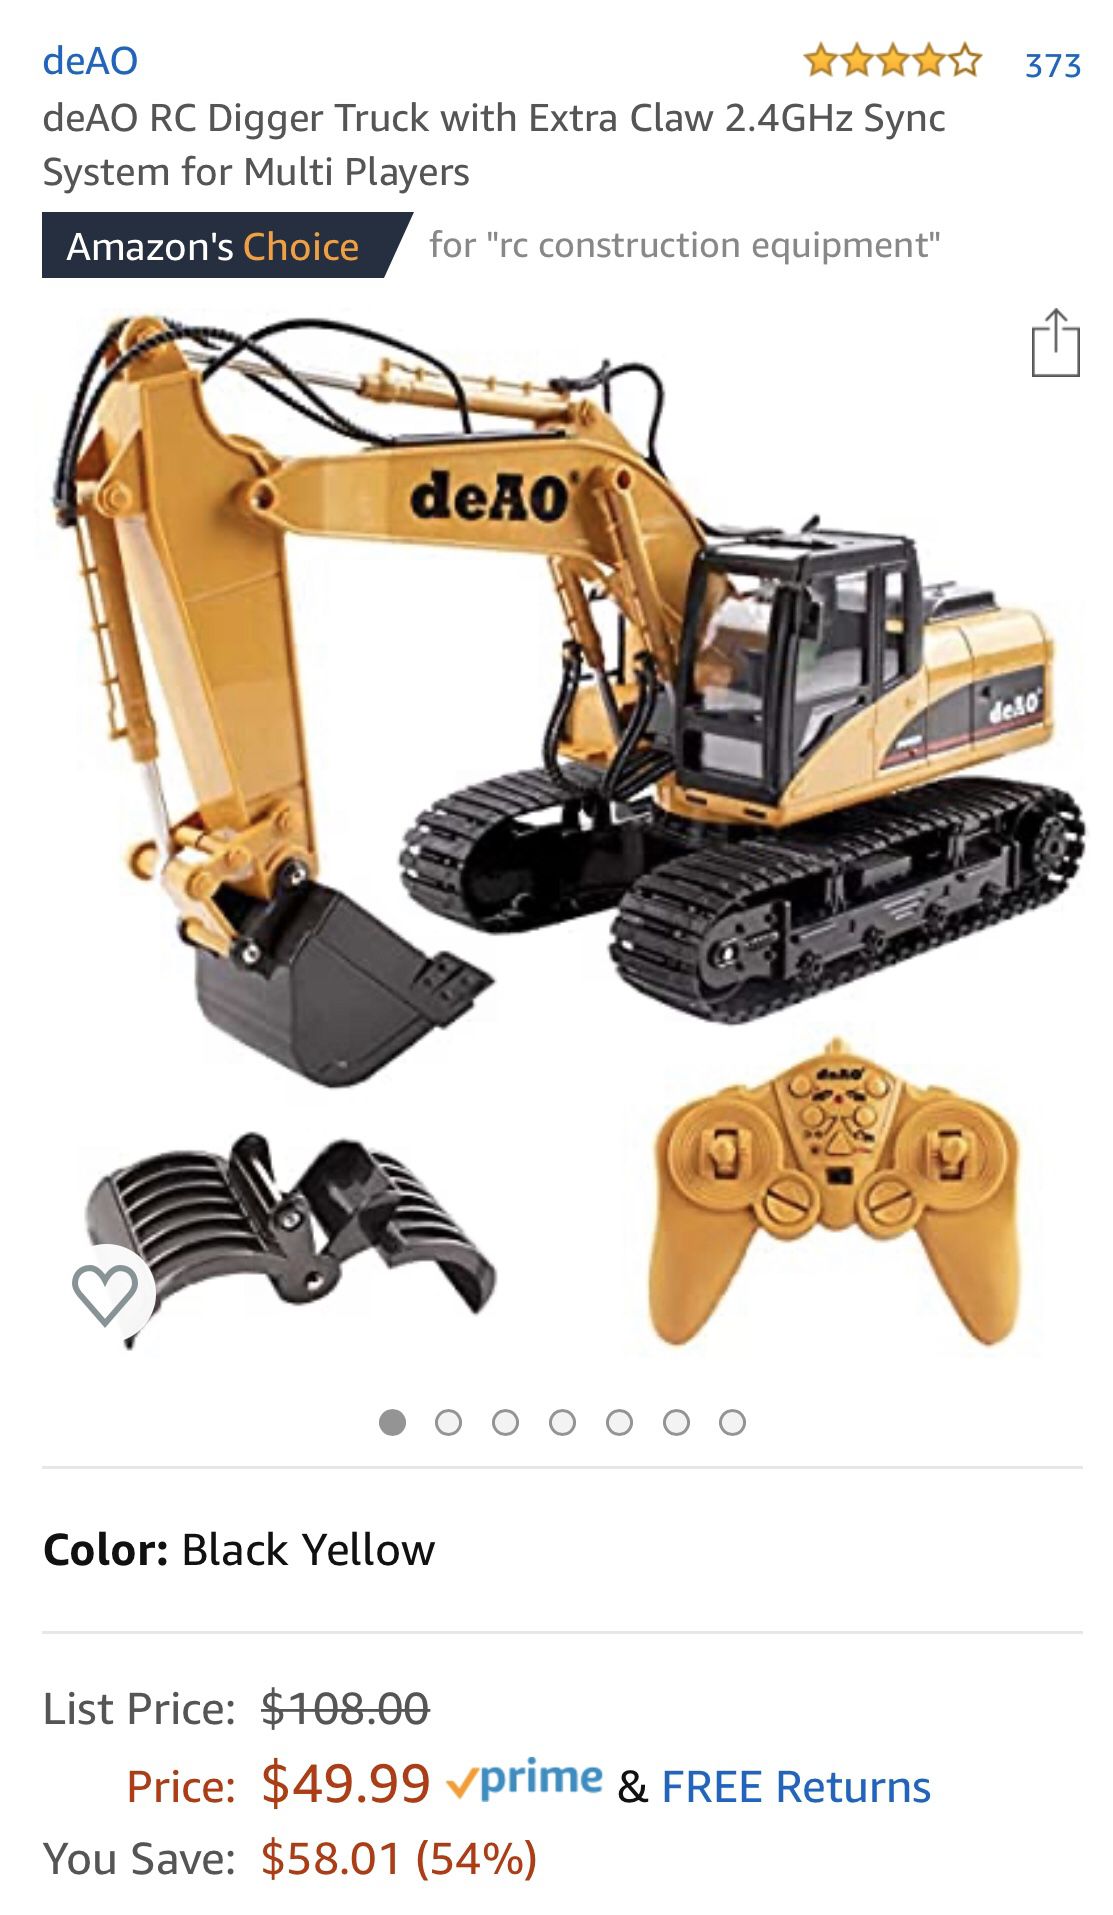 Brand new deAO RC Digger Truck with Extra Claw 2.4GHz Sync System for Multi Players(pick up only)